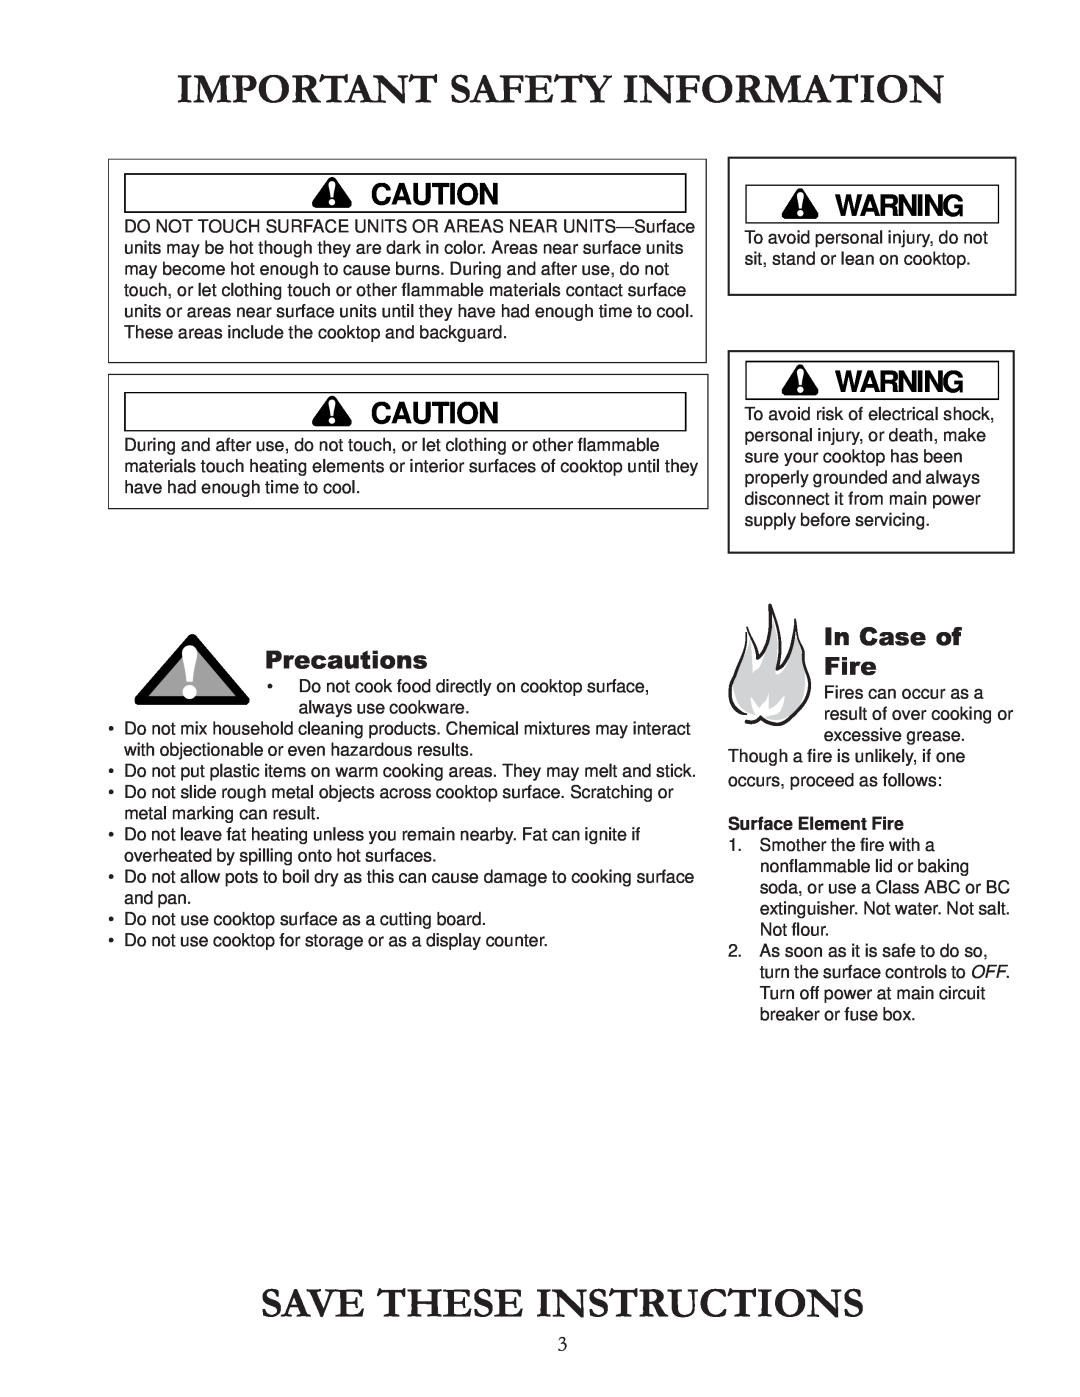 Amana AKT3630 Important Safety Information, Save These Instructions, Precautions, In Case of Fire, Surface Element Fire 